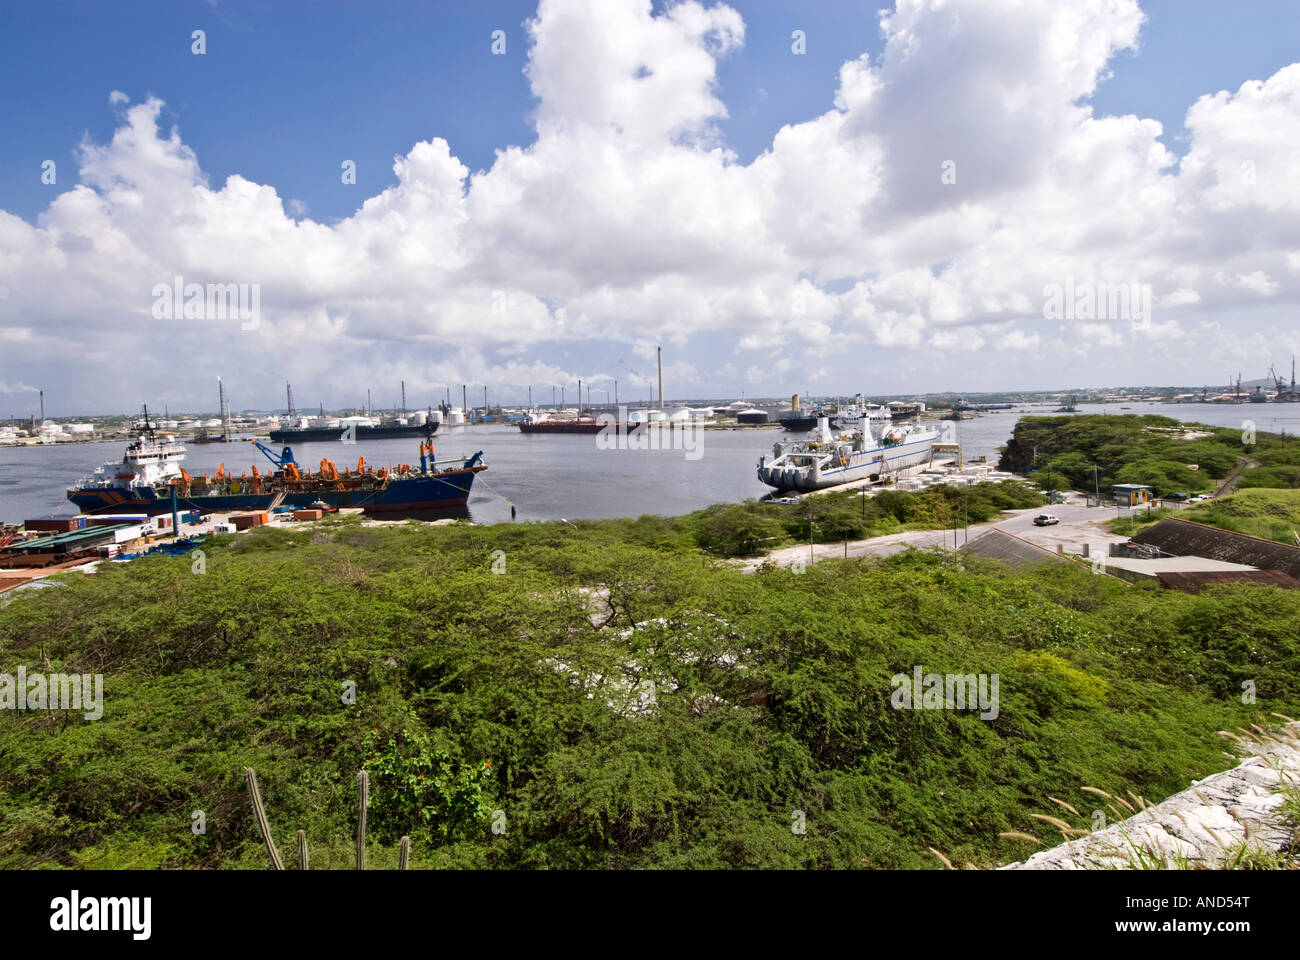 Commercial shipping at anchor in St. Anna Bay, Willemstad, Curacao Stock Photo